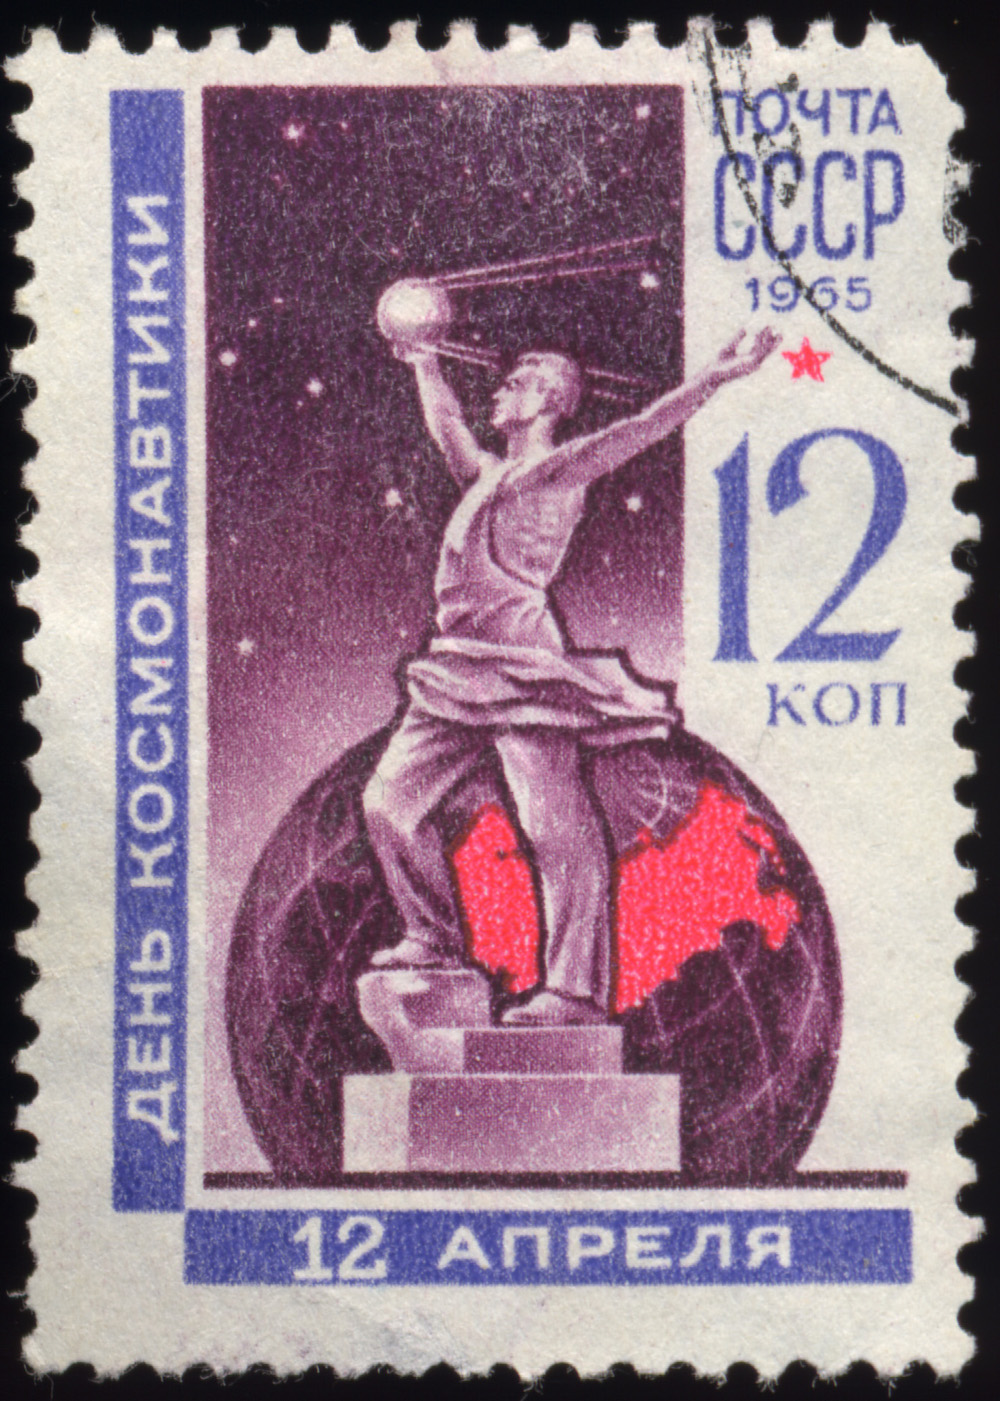 Soviet stamp carrying the image of the Sputnik monument printed in honour of Cosmonautics Day